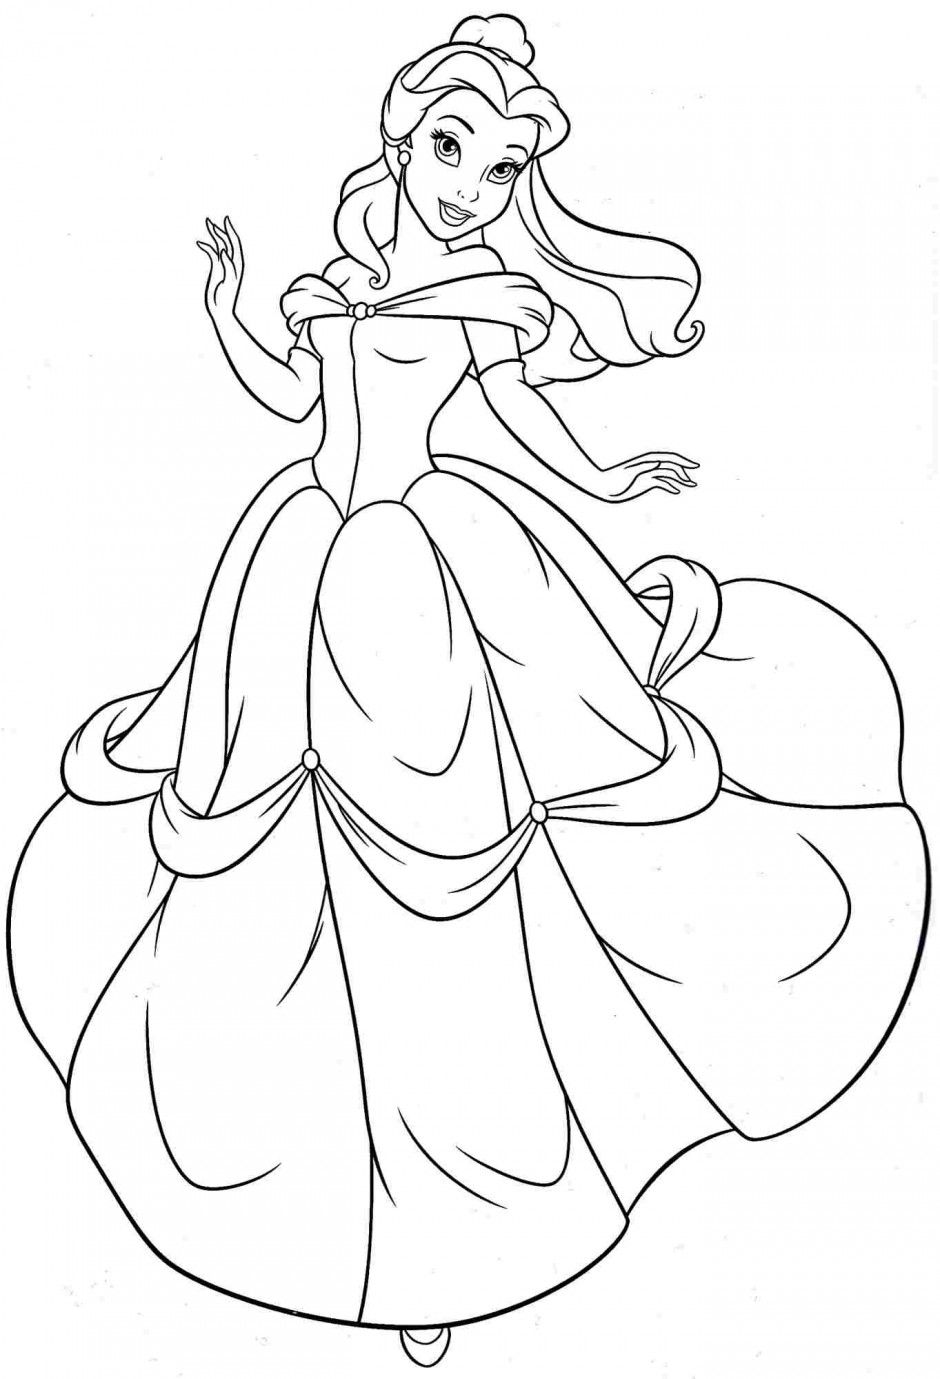 Free printable belle coloring pages for kids disney princess coloring pages cinderella coloring pages disney princess colors